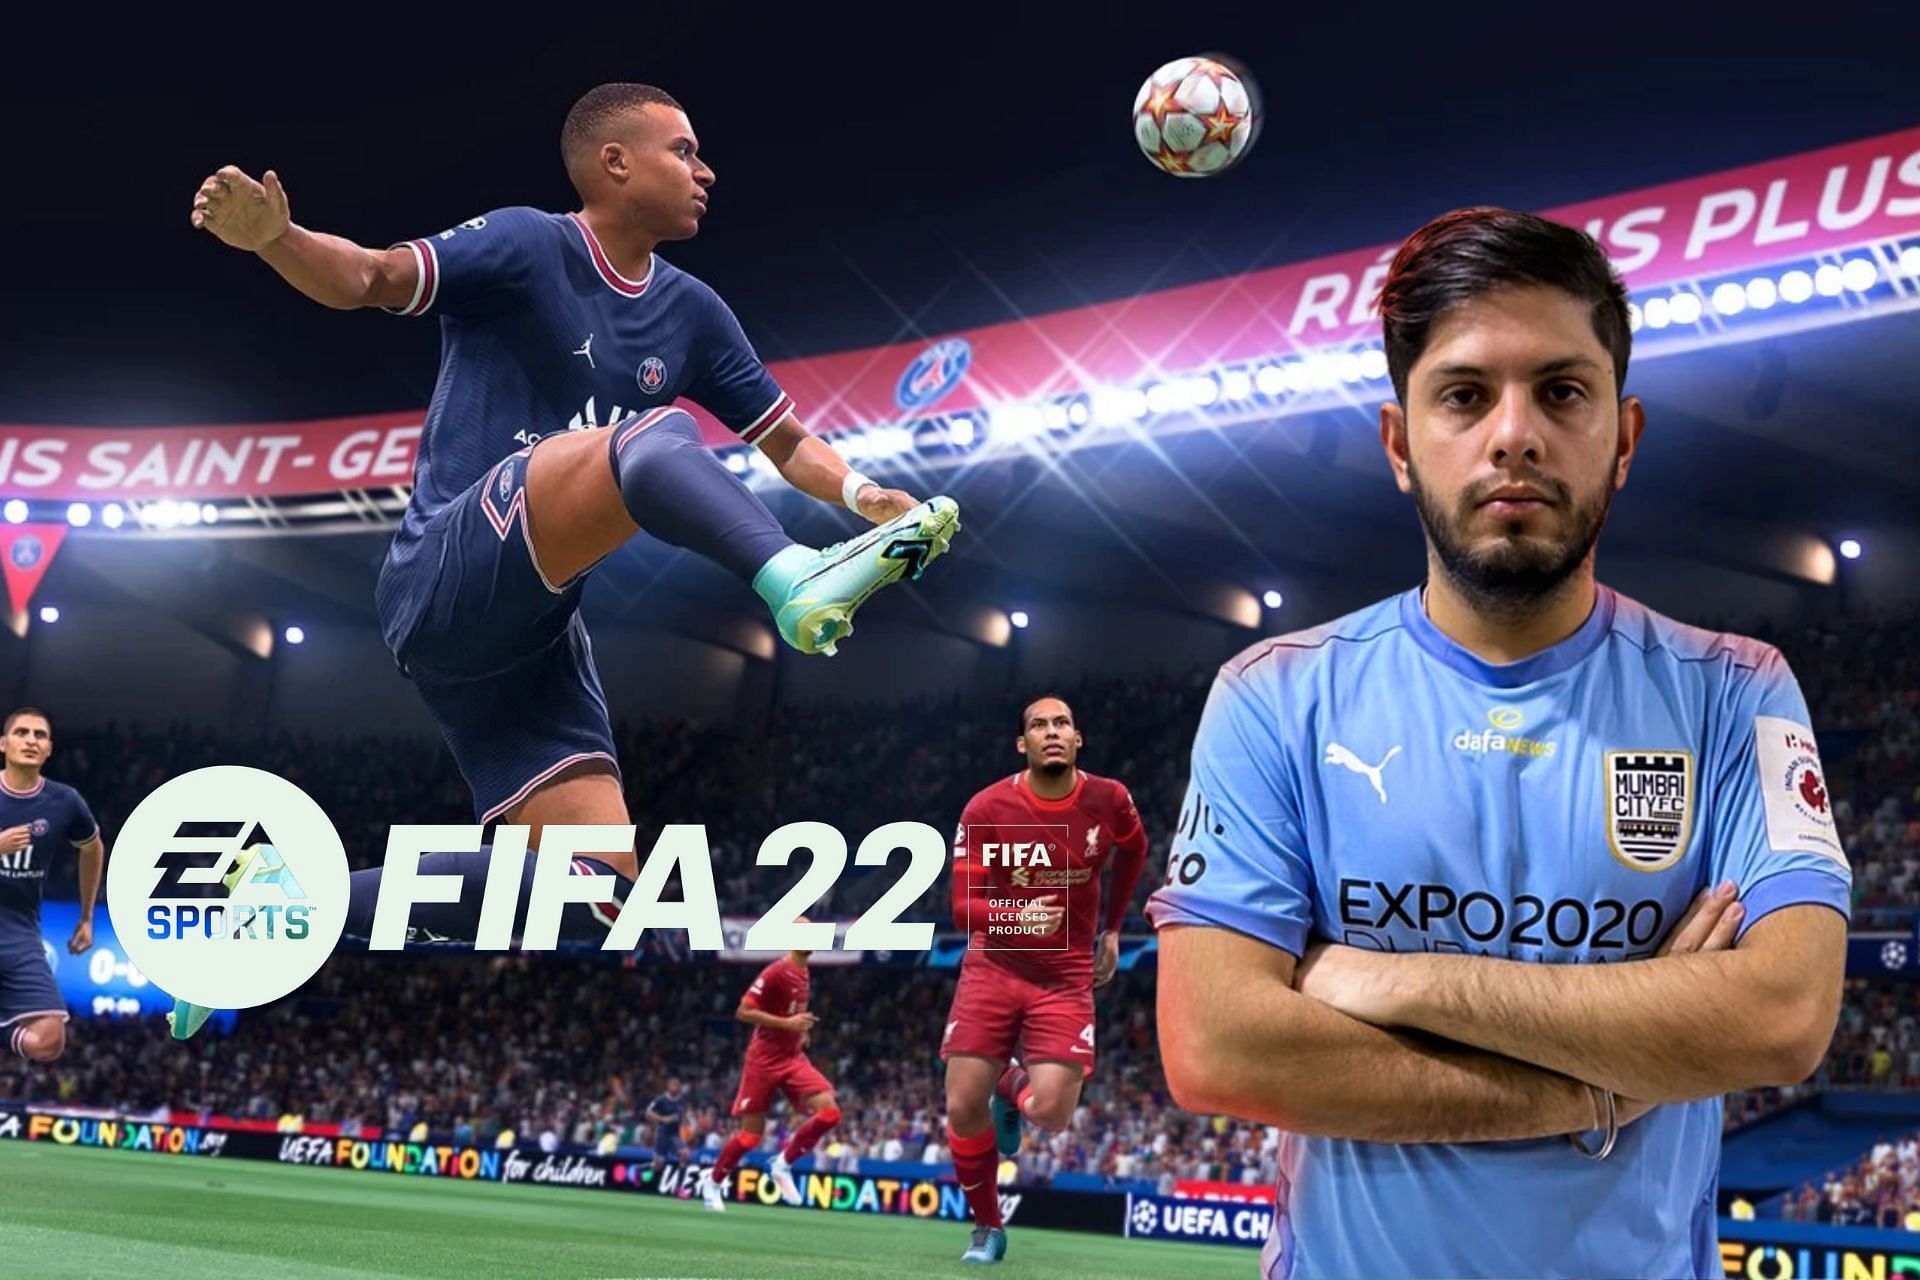 Saksham sheds light on his FIFA journey so far, his thoughts on Mumbai City FC forming their esports team, and how he feels about representing such a massive ISL club (Image via Sportskeeda)